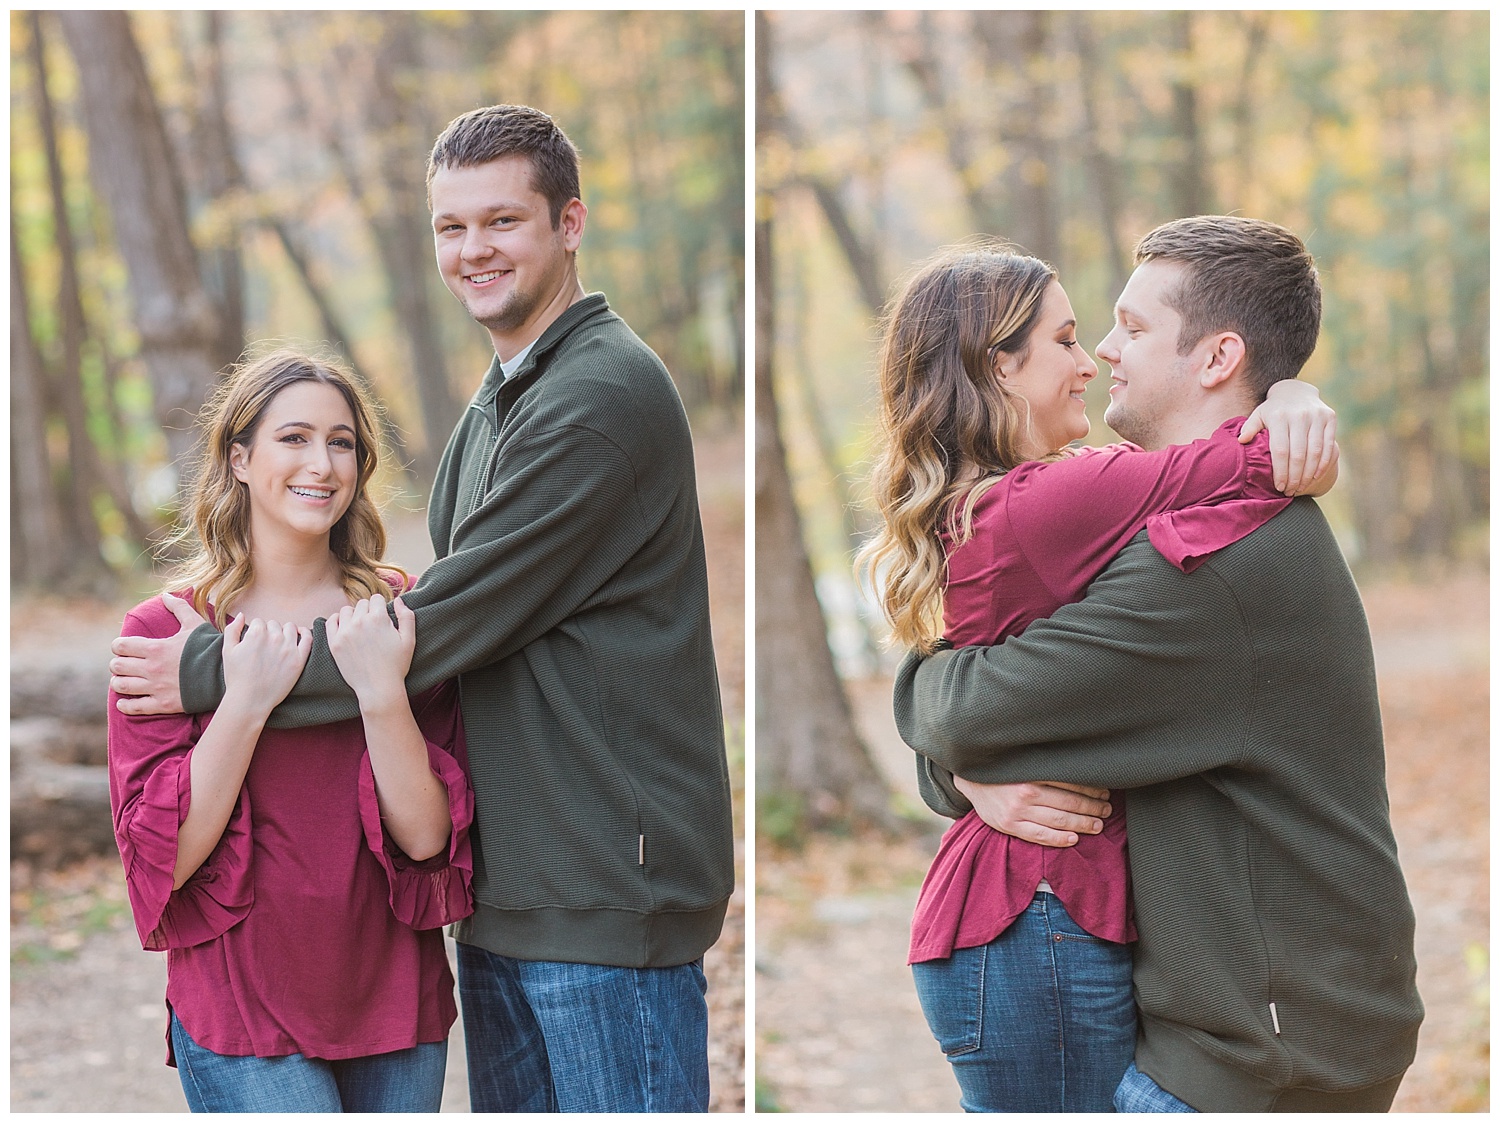 Couples session - Letchworth state park - Lass & Beau -140_Buffalo wedding photography.jpg